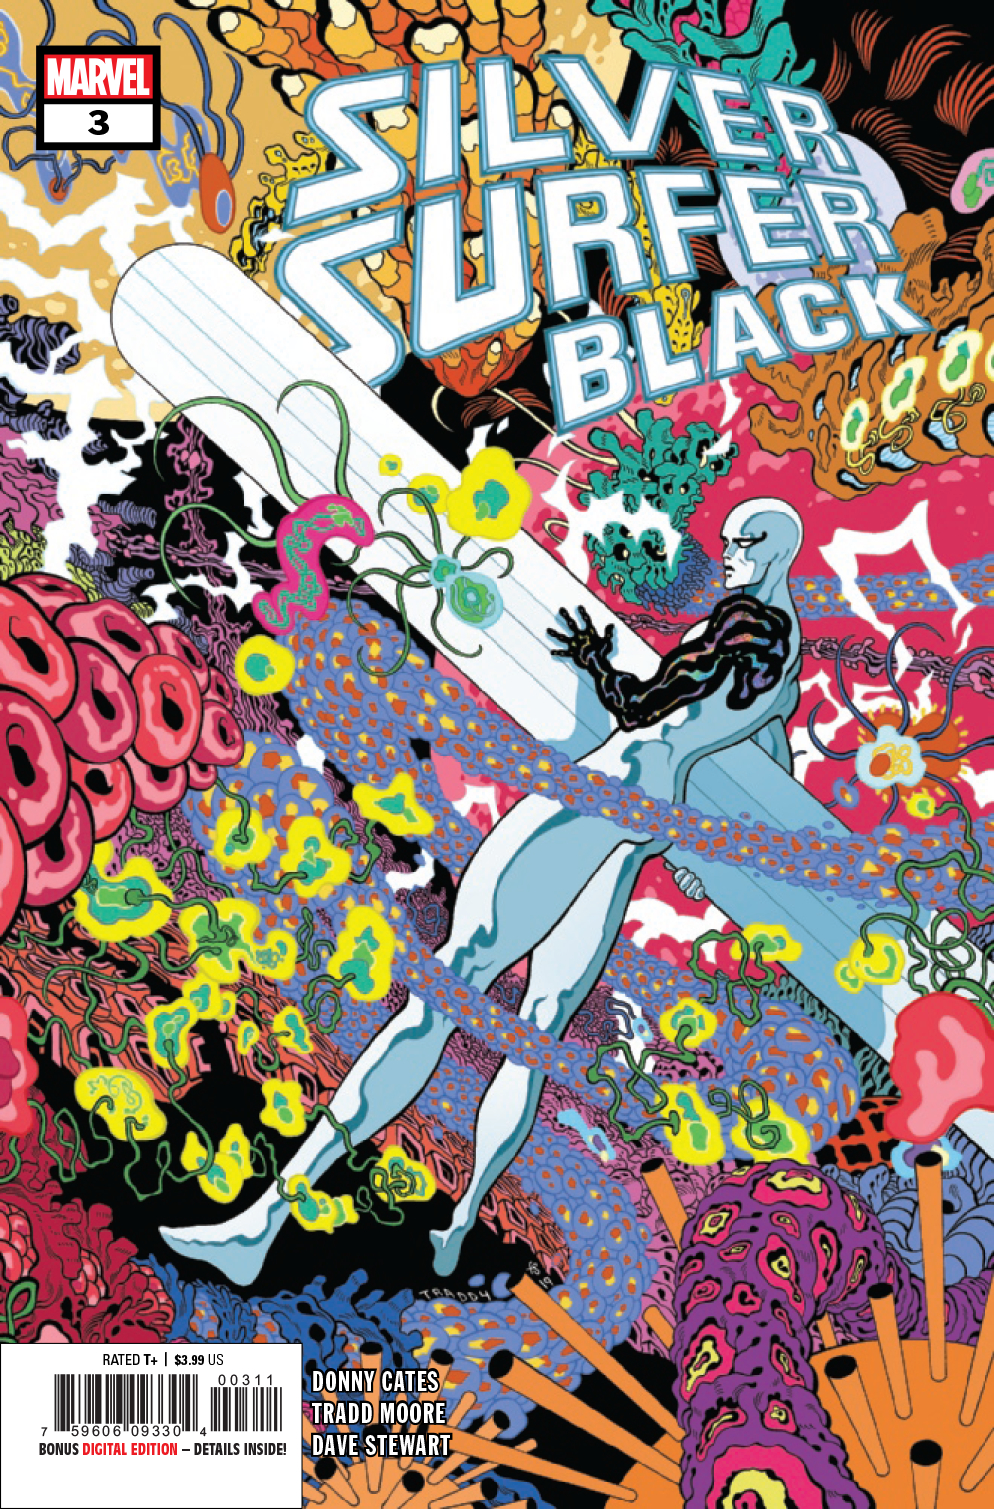 Silver Surfer Black no. 3 (3 of 5) (2019 Series)